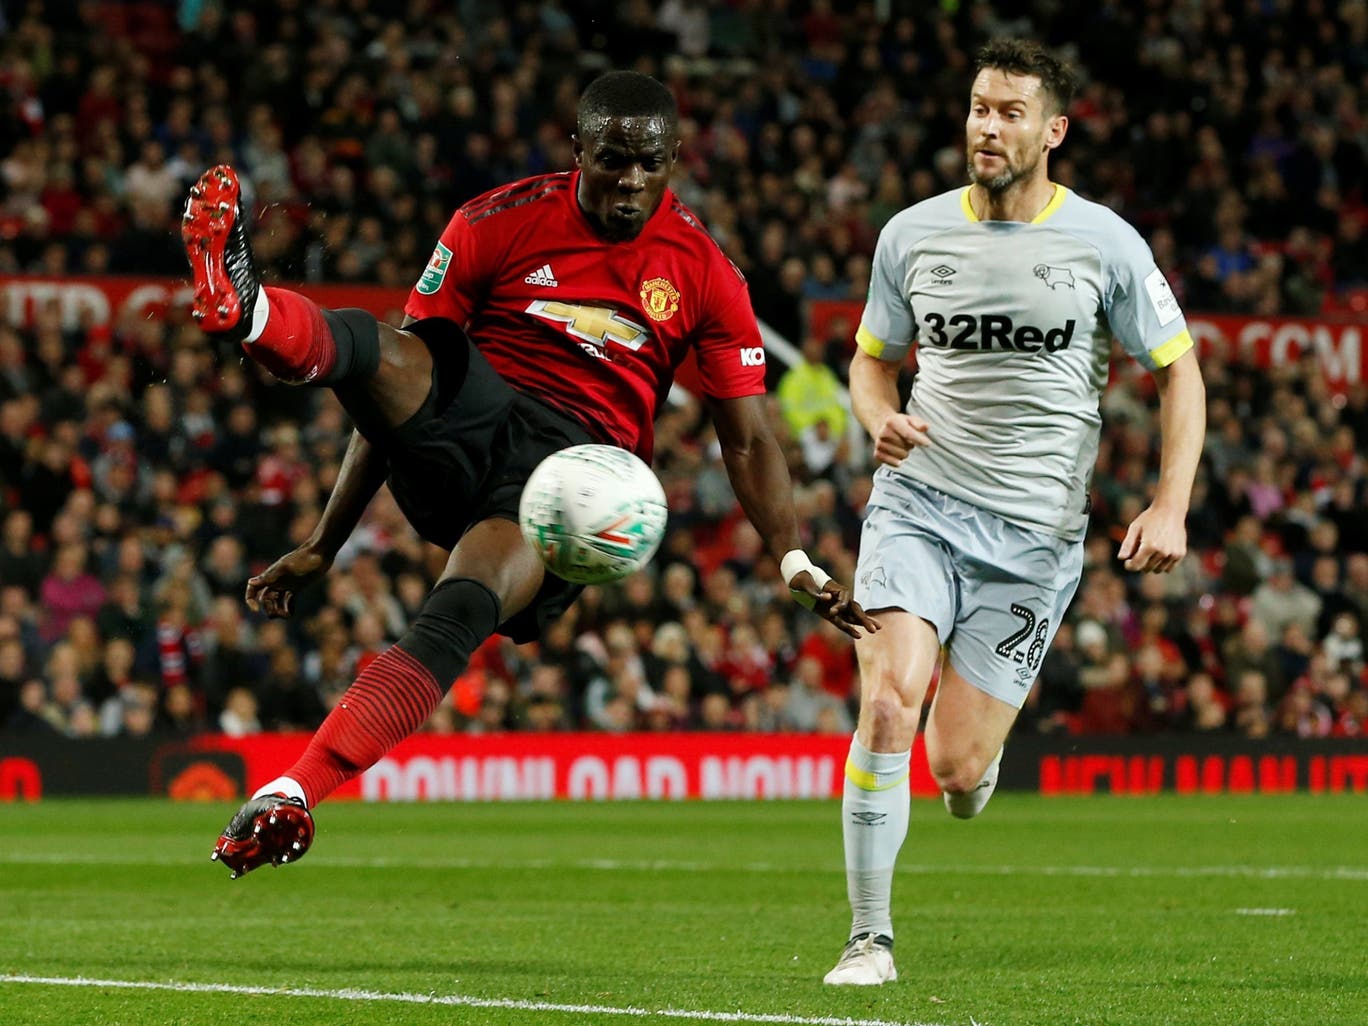 Played well, Derby came at United a lot in the first half and he stopped them getting an equaliser.